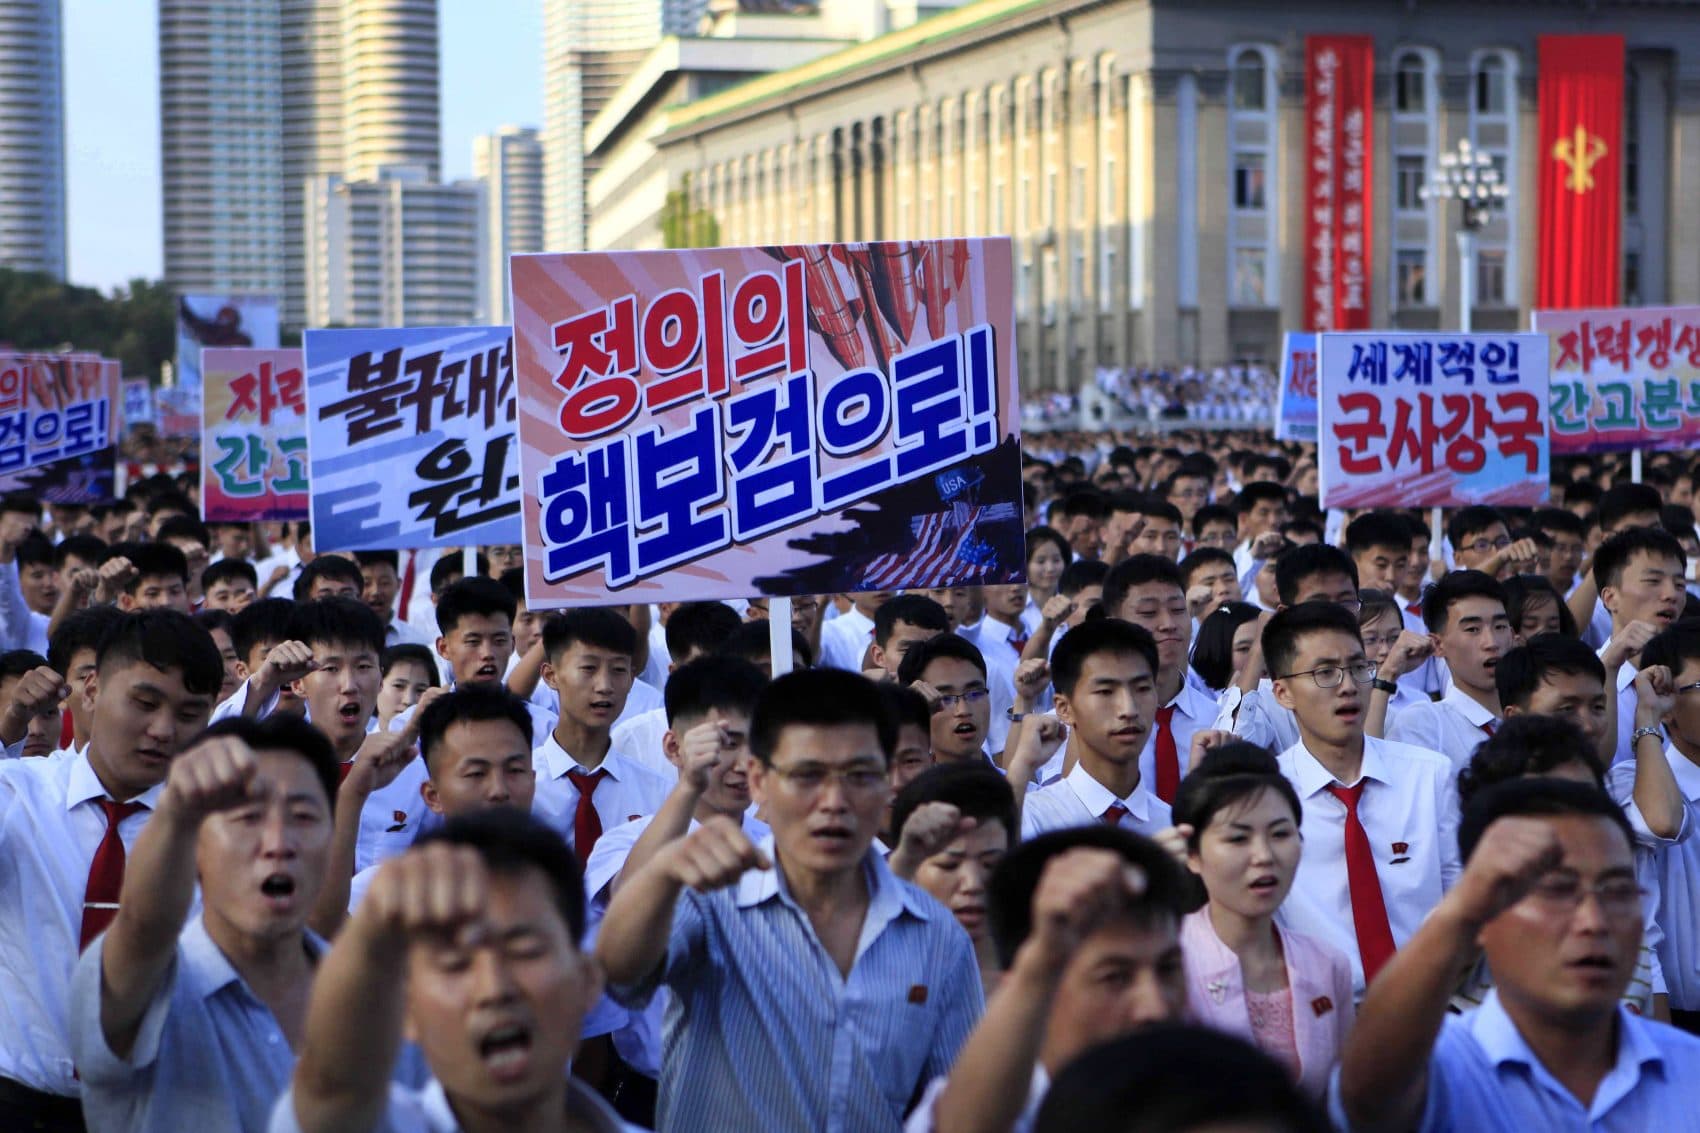 North Koreans gather for a rally at Kim Il Sung Square as a show of support for their rejection of the United Nations' latest round of sanctions on Wednesday Aug. 9, 2017, in Pyongyang, North Korea. (Jon Chol Jin/AP)